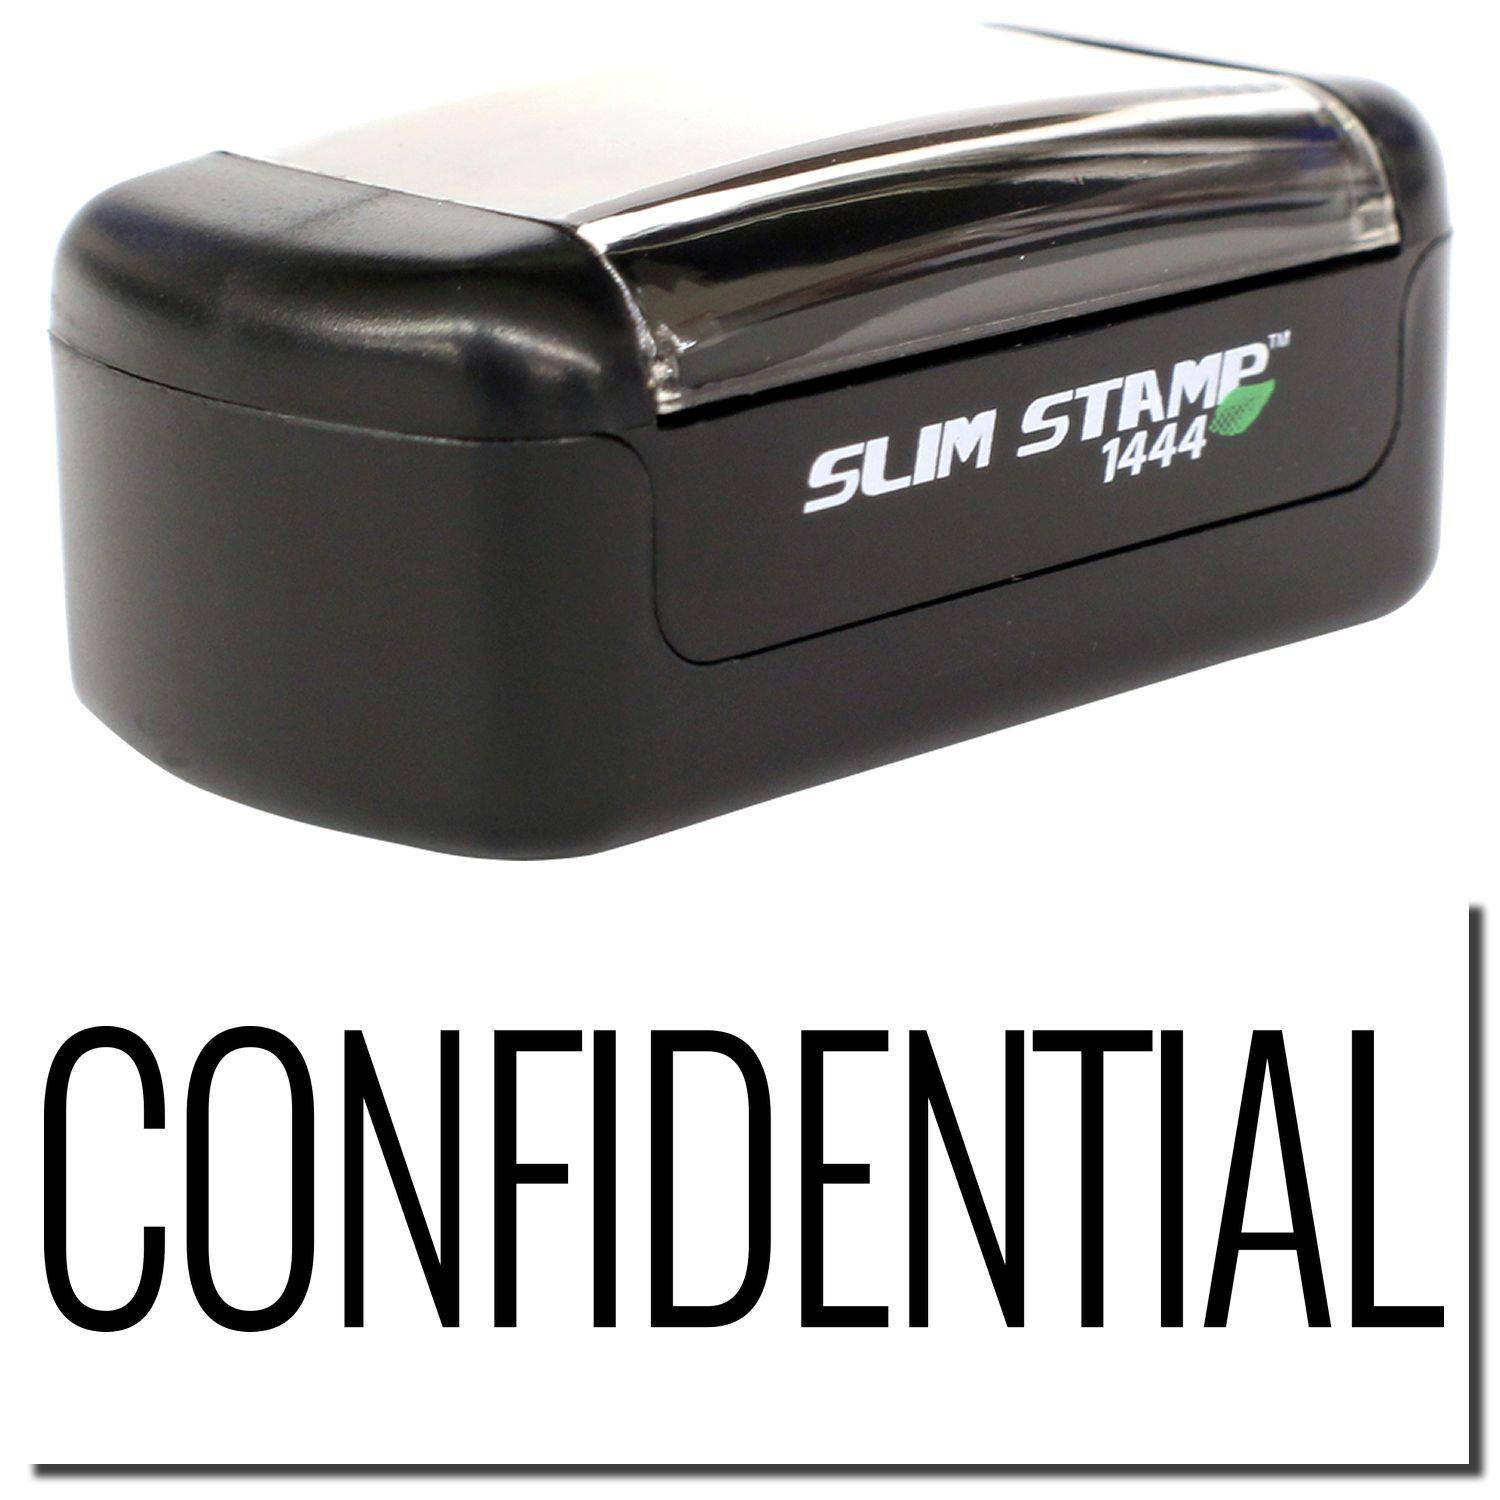 A stock office pre-inked stamp with a stamped image showing how the text "CONFIDENTIAL" in a narrow font is displayed after stamping.